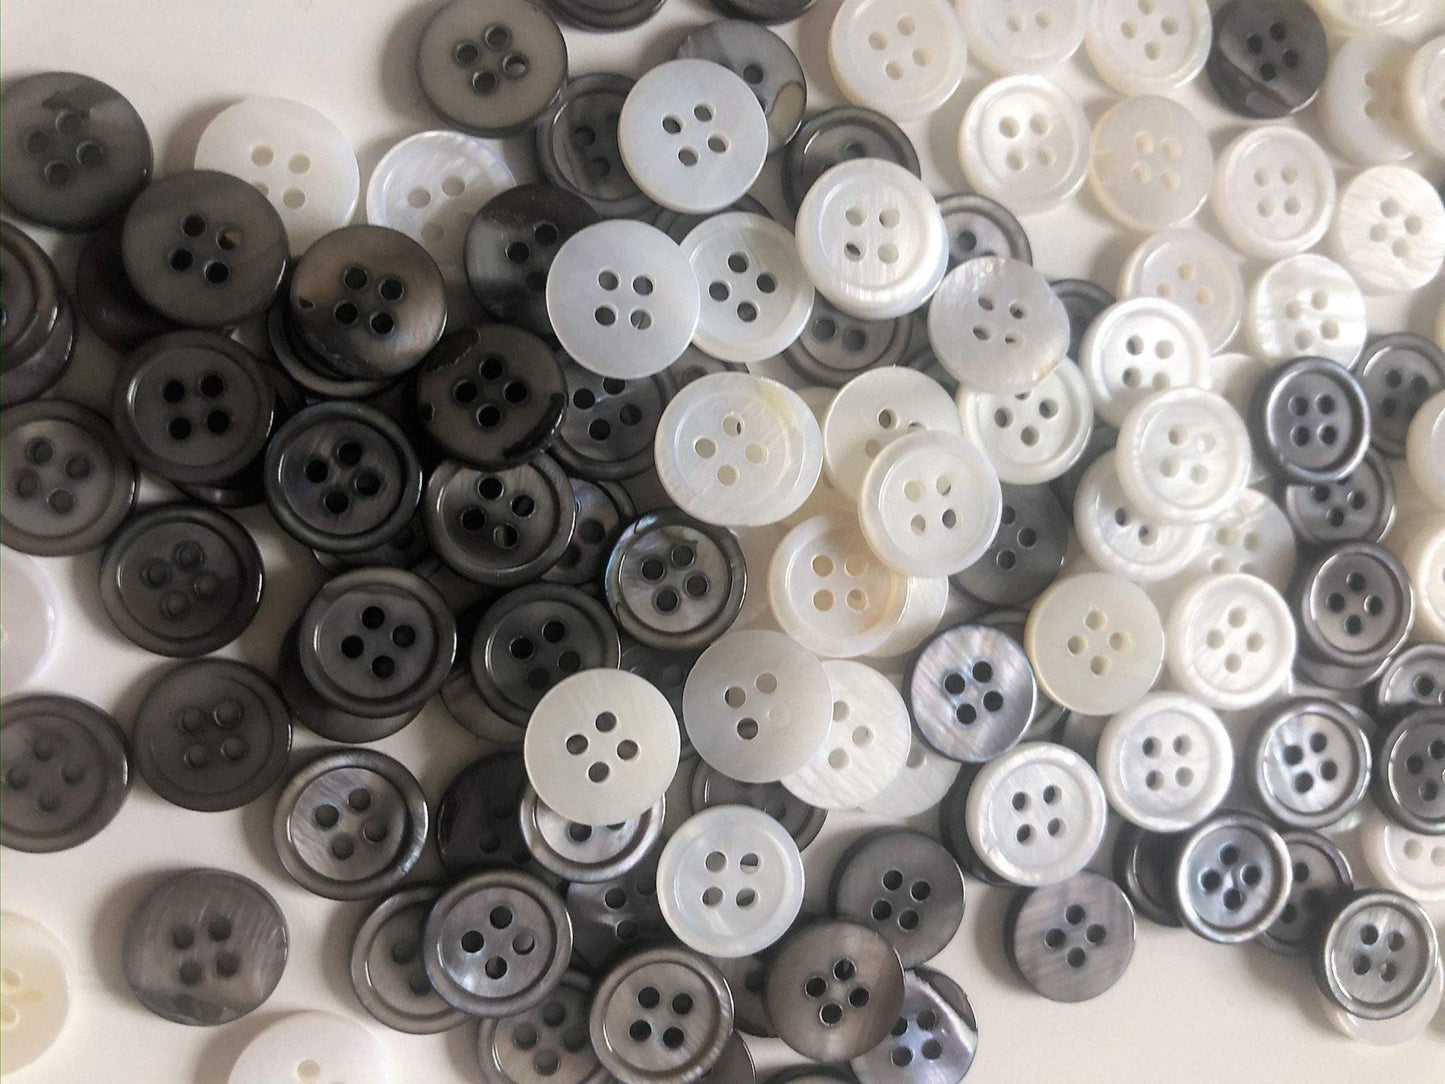 6 White Natural Shell Buttons - Made From Real Freshwater Shell